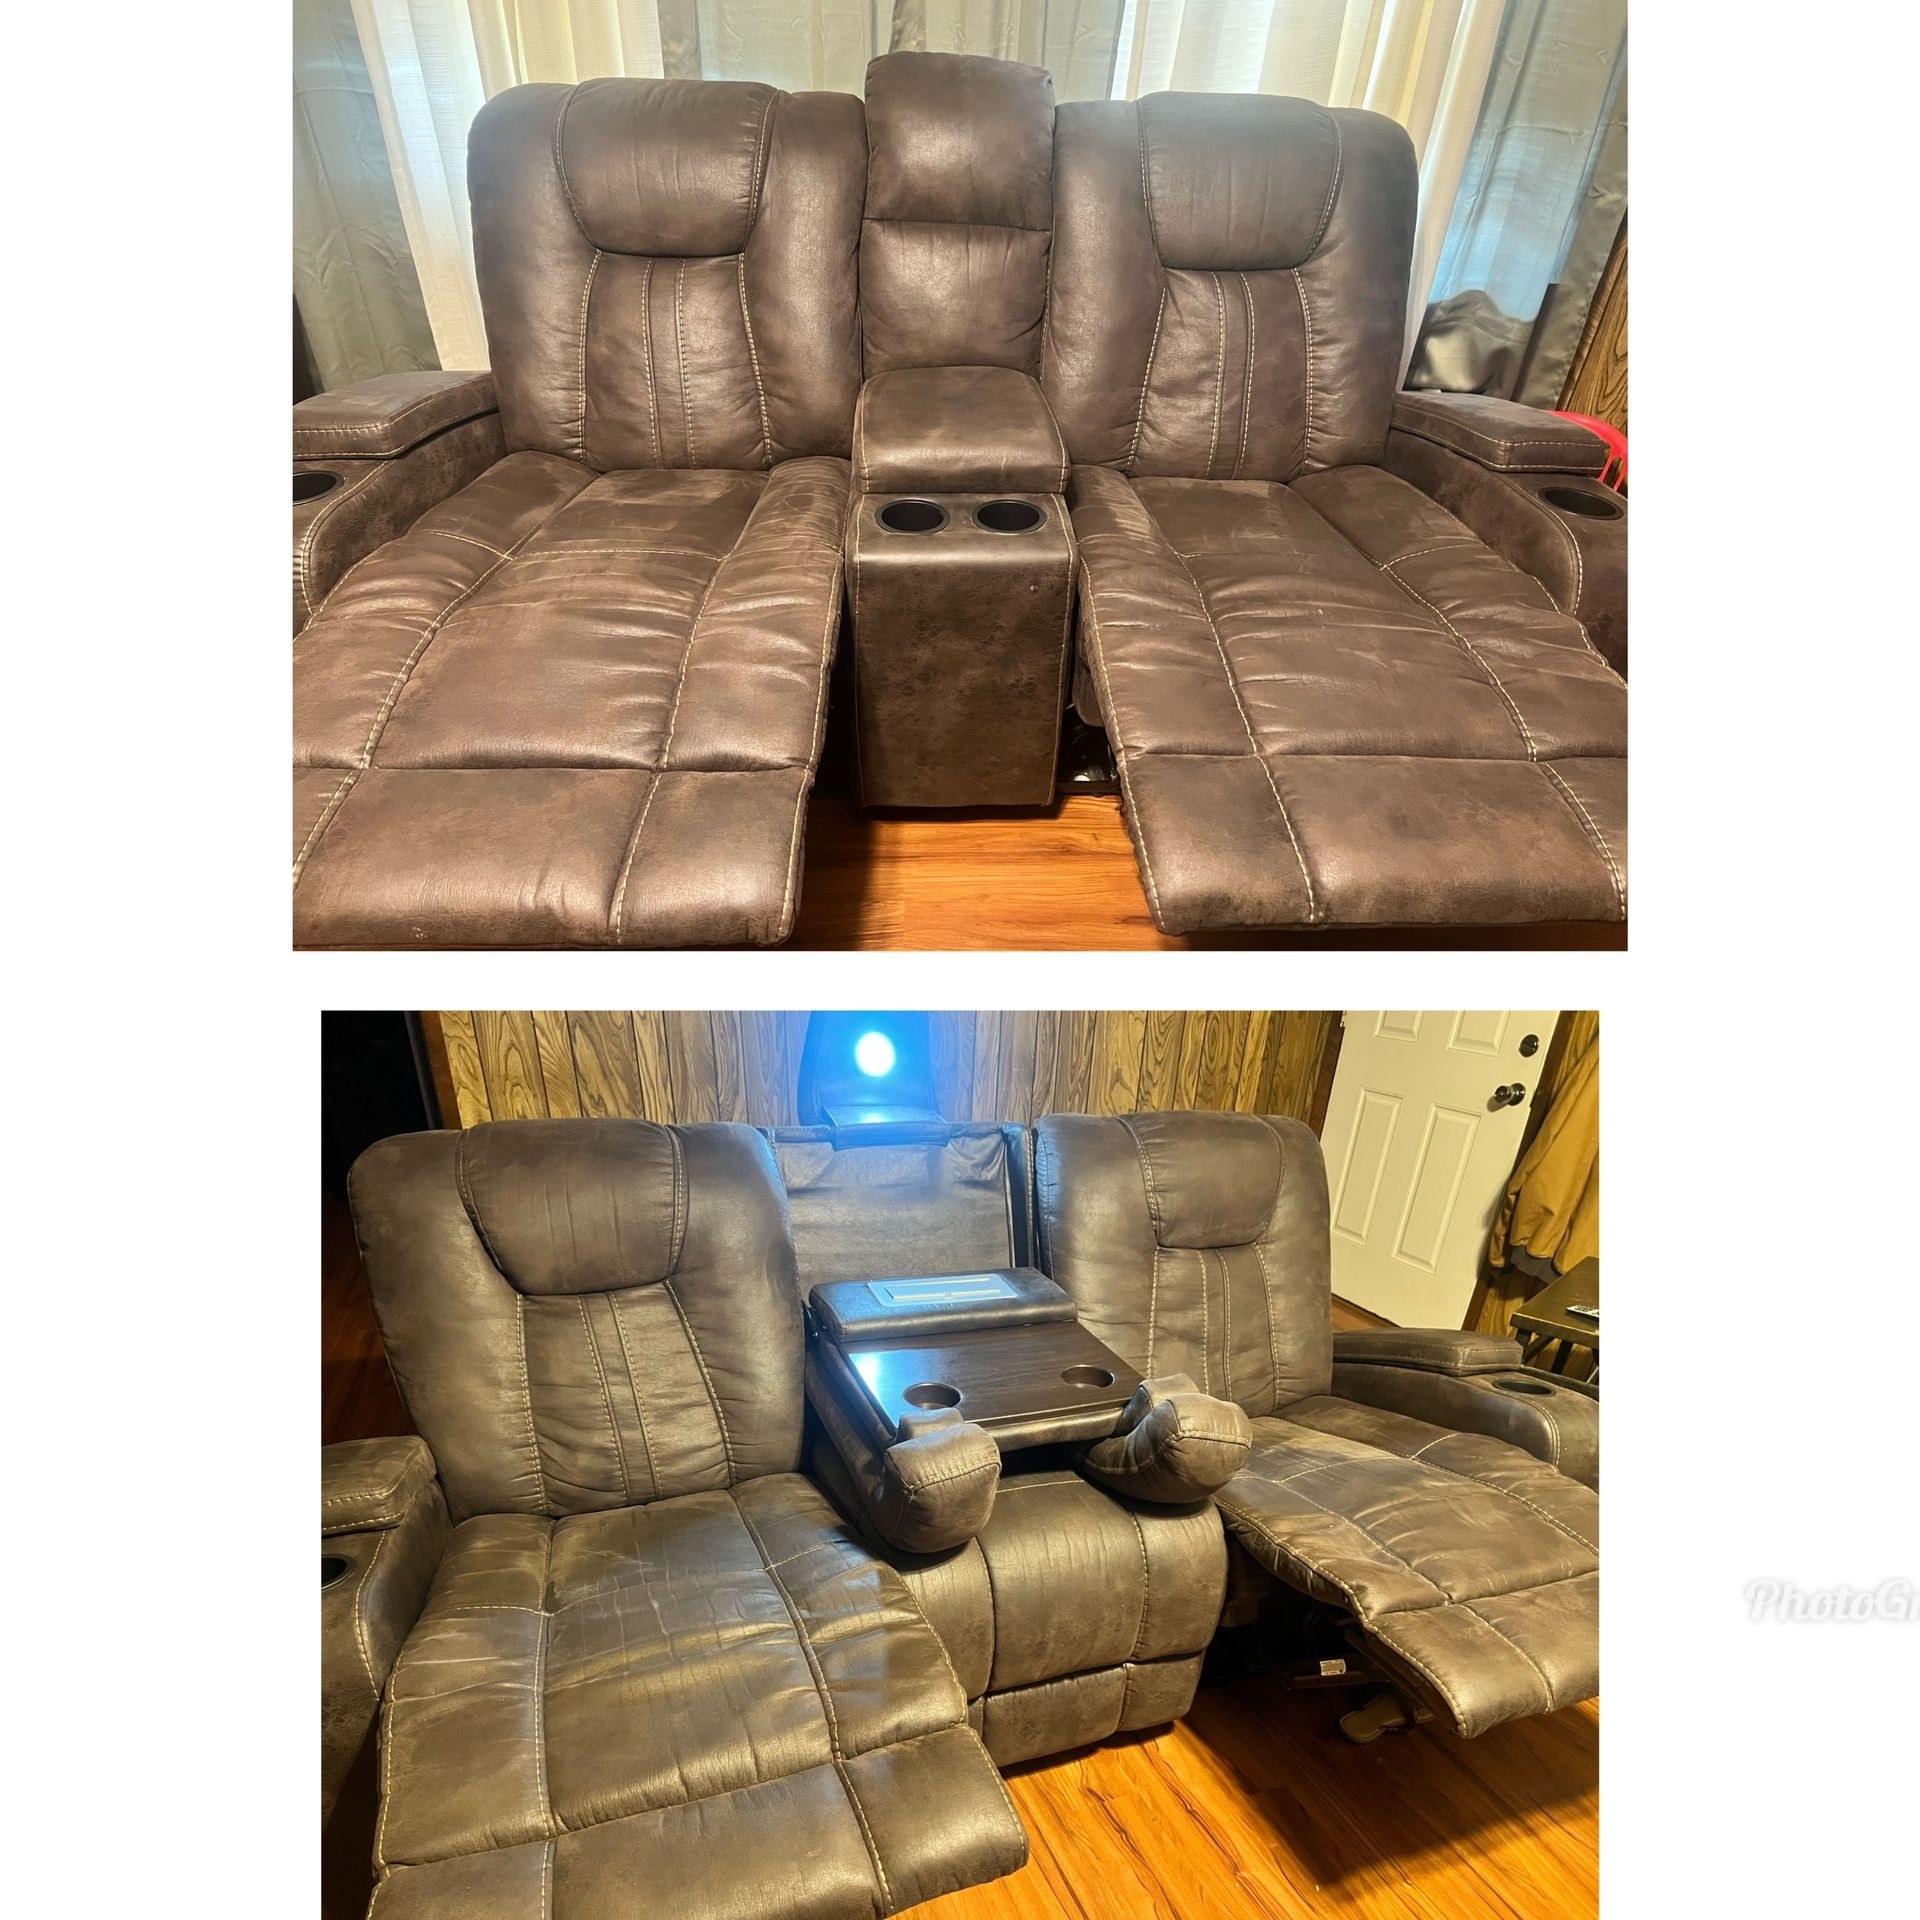 Couch-taking offer